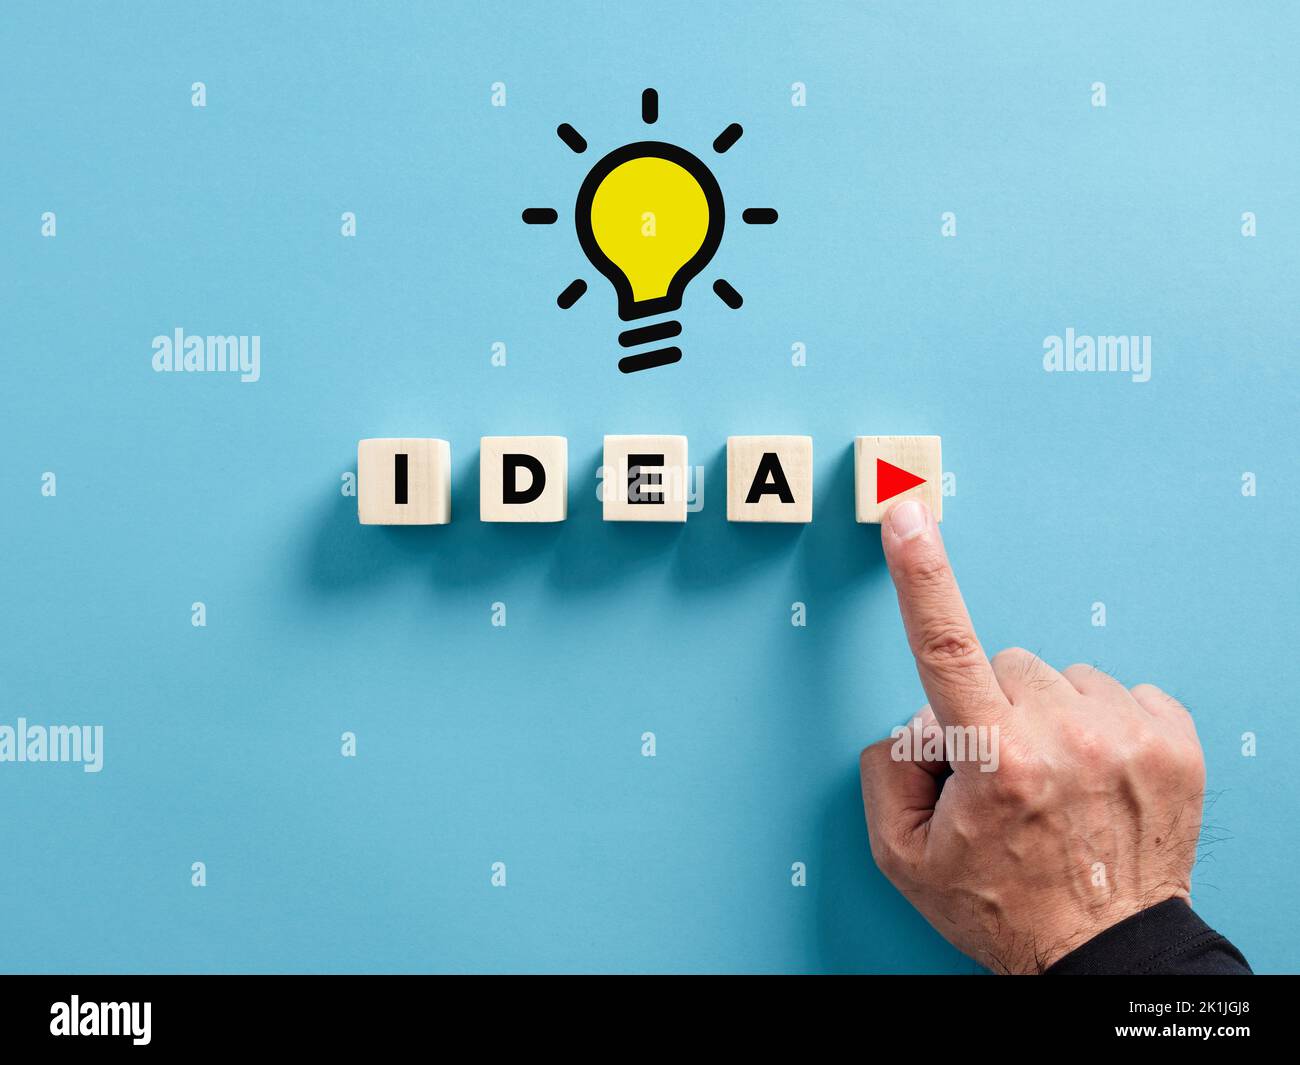 Male hand presses the play button with the word idea on wooden cubes. To execute an idea concept. Stock Photo